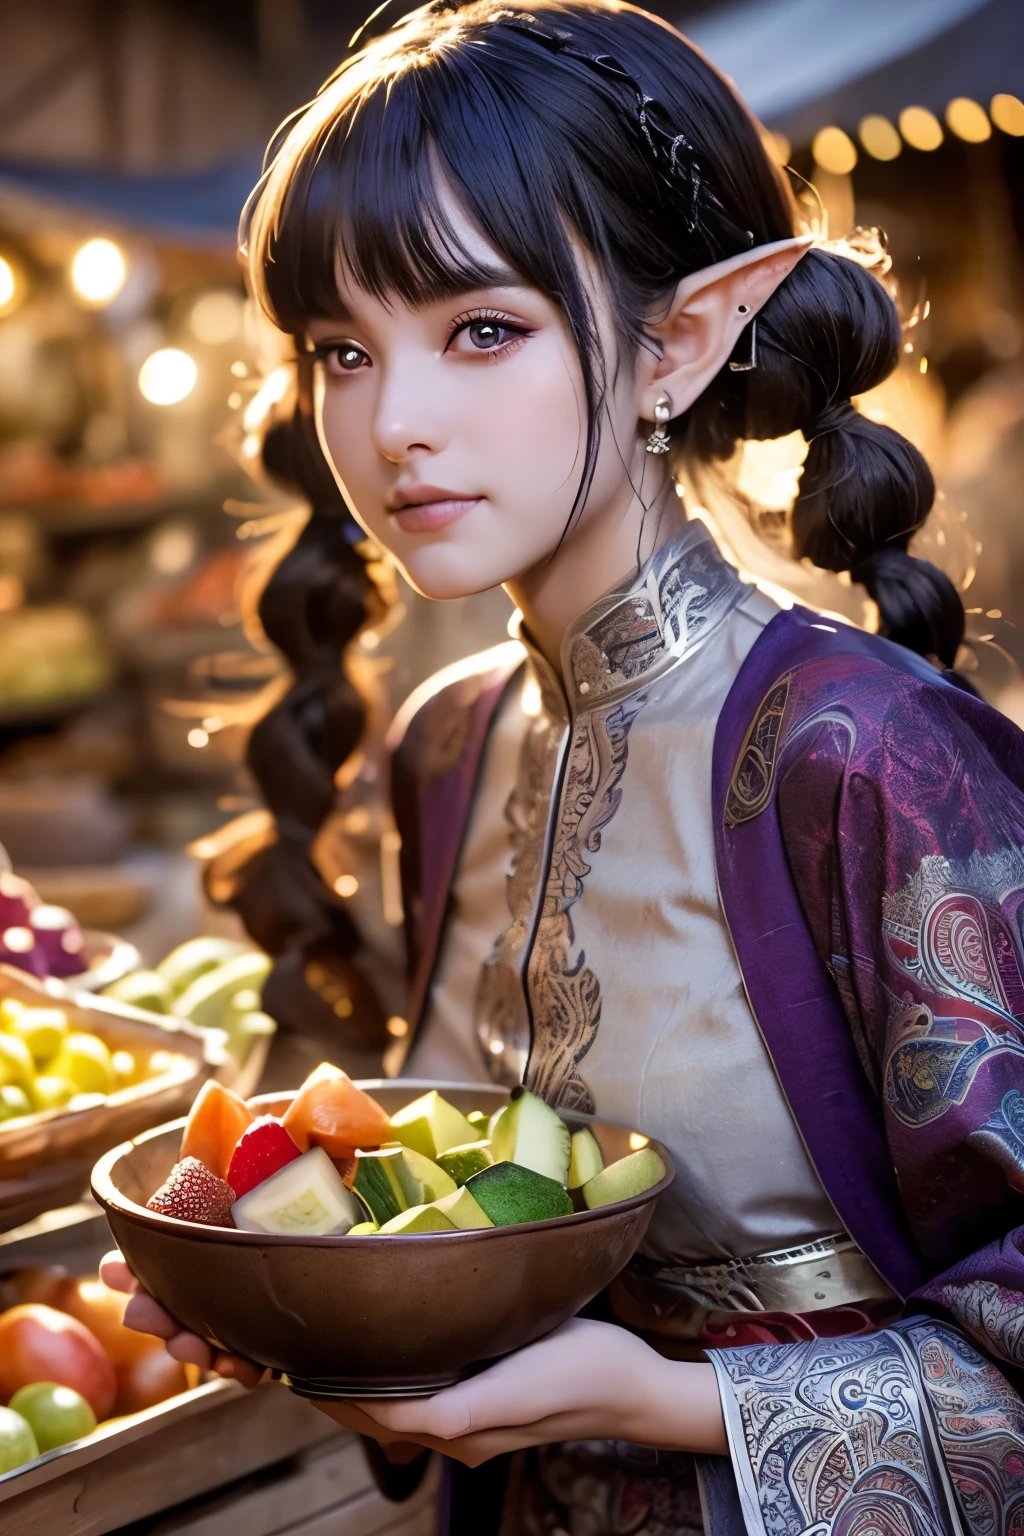 (Ultra-detailed face, bashful, pigtails:1.3), (Fantasy Illustration with Gothic & Ukiyo-e & Comic Art), (Full body, A middle-aged dark elf woman with silver hair, blunt bangs, very long pigtails and dark purple skin, lavender eyes), (She wears a hibiscus hair ornament, a white blouse of washed cotton and a purple rolled skirt with a paisley pattern, and leather sandals), BREAK (She is serving a small bowl of fresh vegetable and fruit salad to a customer in a medieval Asian port town market), BREAK (In the background, floating in the starry sky, is a tall, narrow, Middle Eastern-style stone clock tower, which appears to be crowded with townspeople)